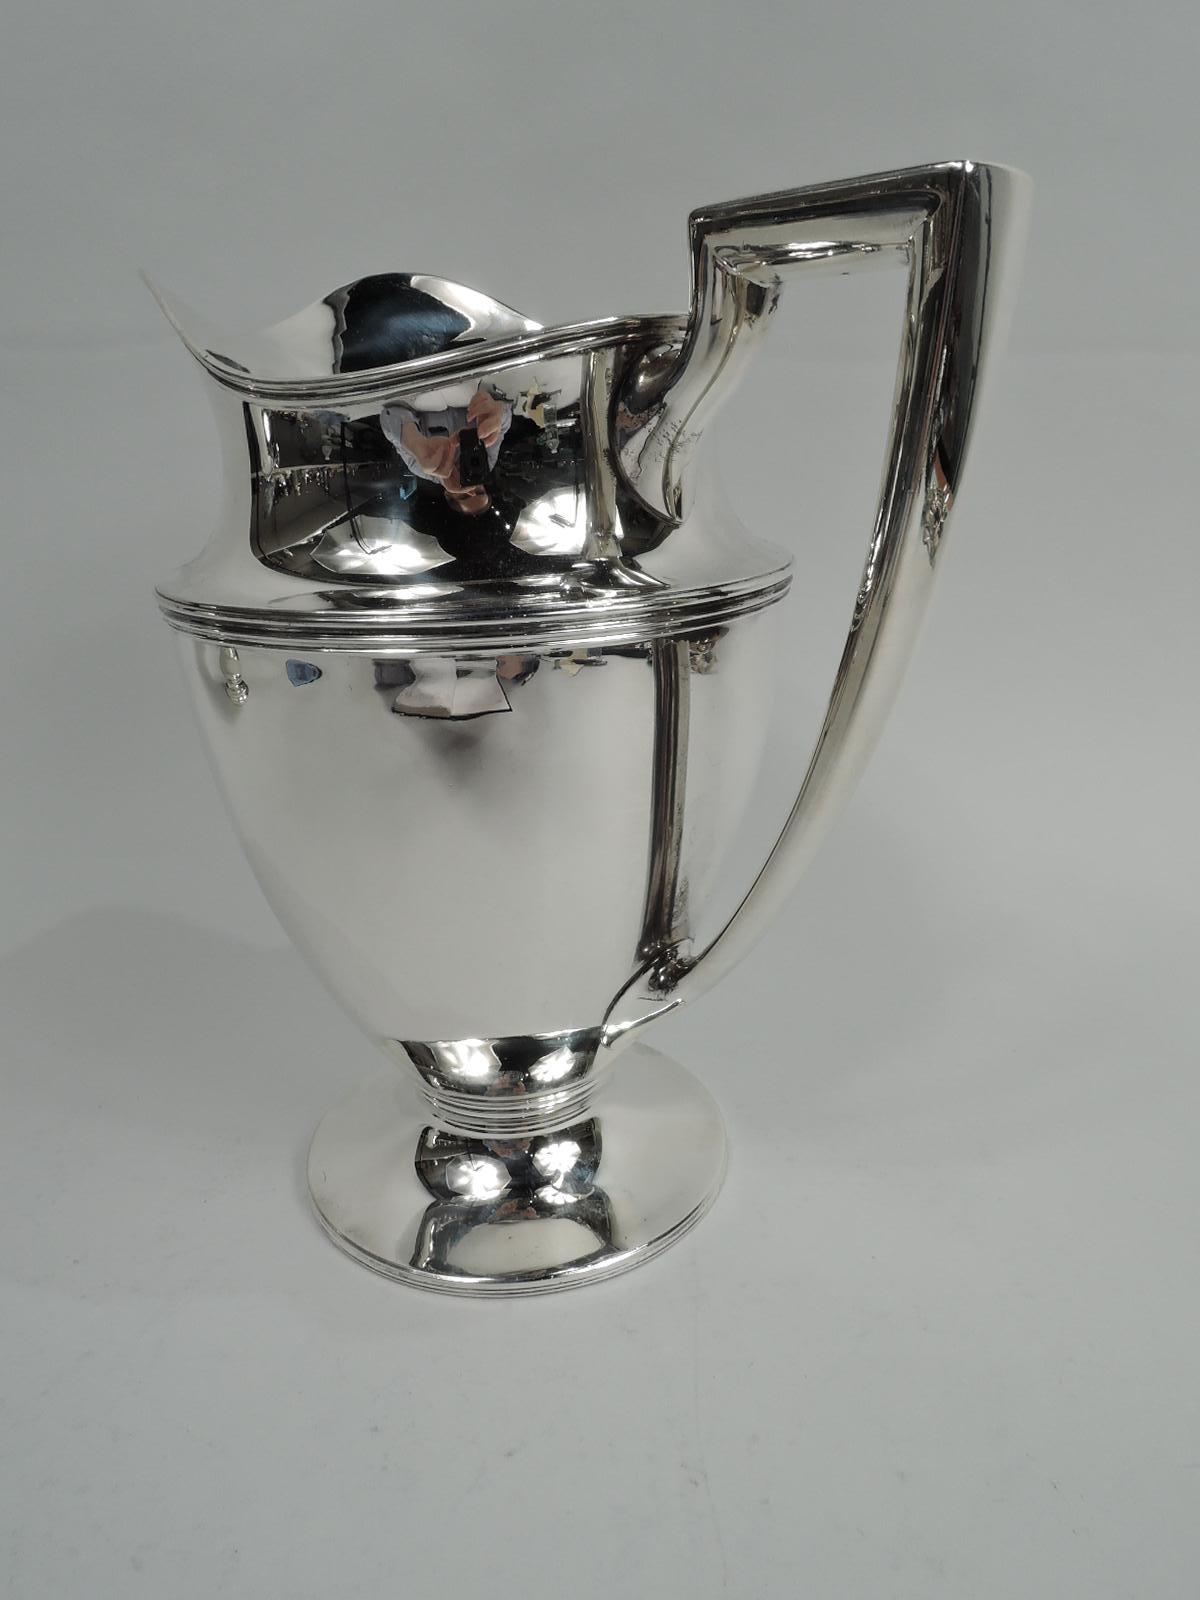 Classic sterling silver water pitcher. Made by Tiffany & Co. in New York, ca 1920. Curved and tapering body, raised foot, scrolled bracket handle, and helmet mouth. Reeding. Fully marked including maker’s stamp, pattern no. 18181, director’s letter